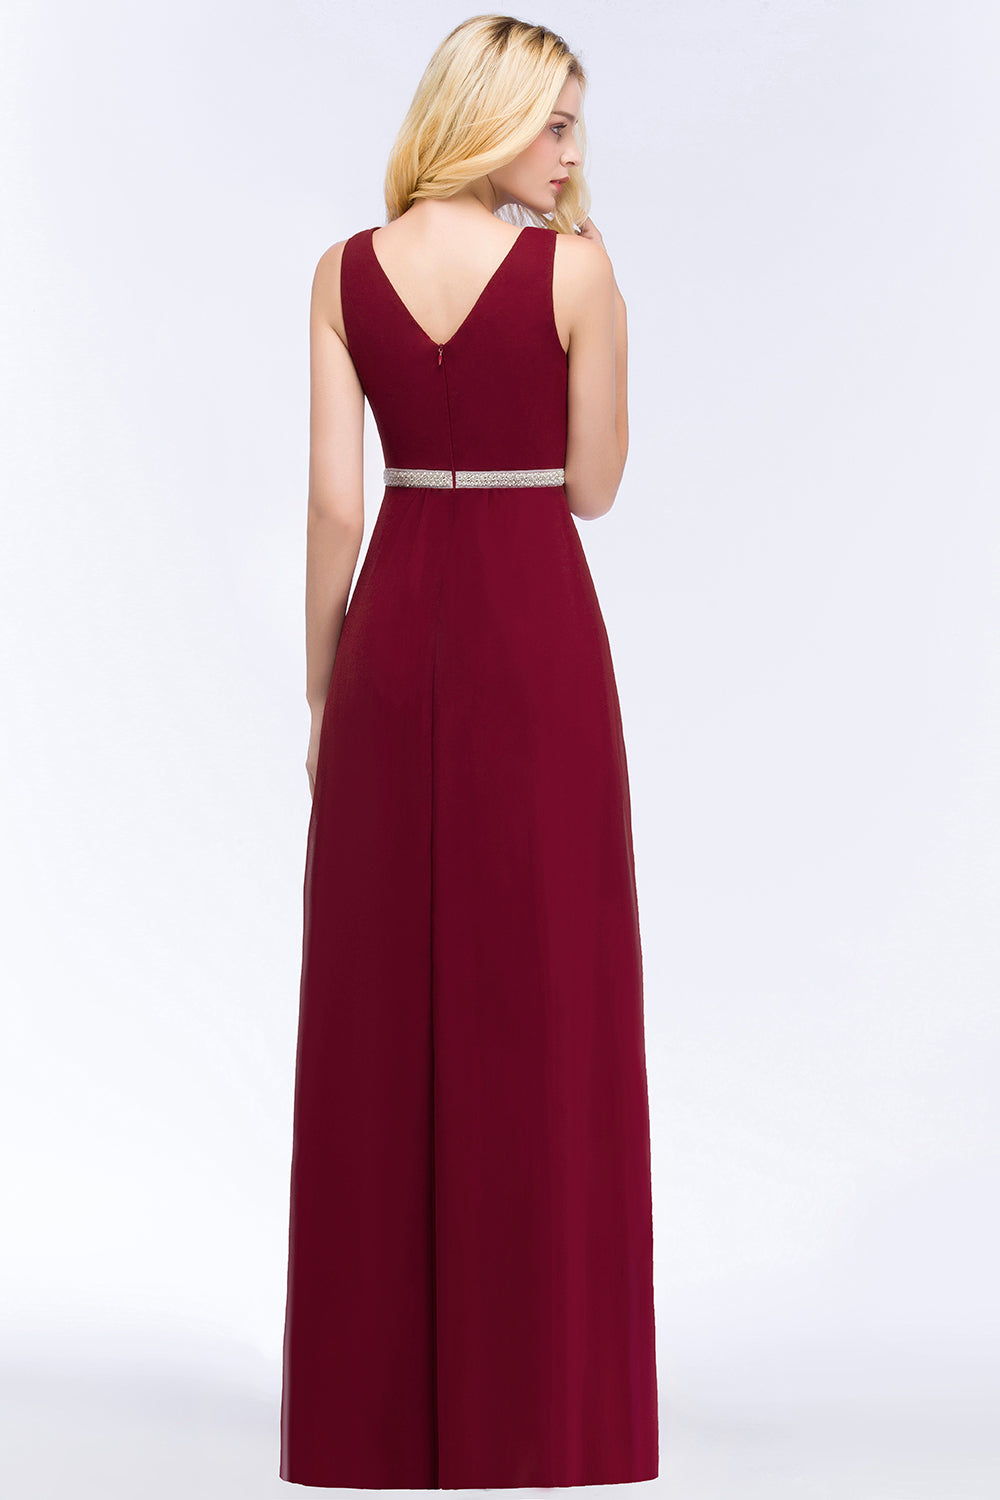 Load image into Gallery viewer, Long A-line Chiffon V-neck Ruffled Bridesmaid Dresses with Beading Sash-BIZTUNNEL
